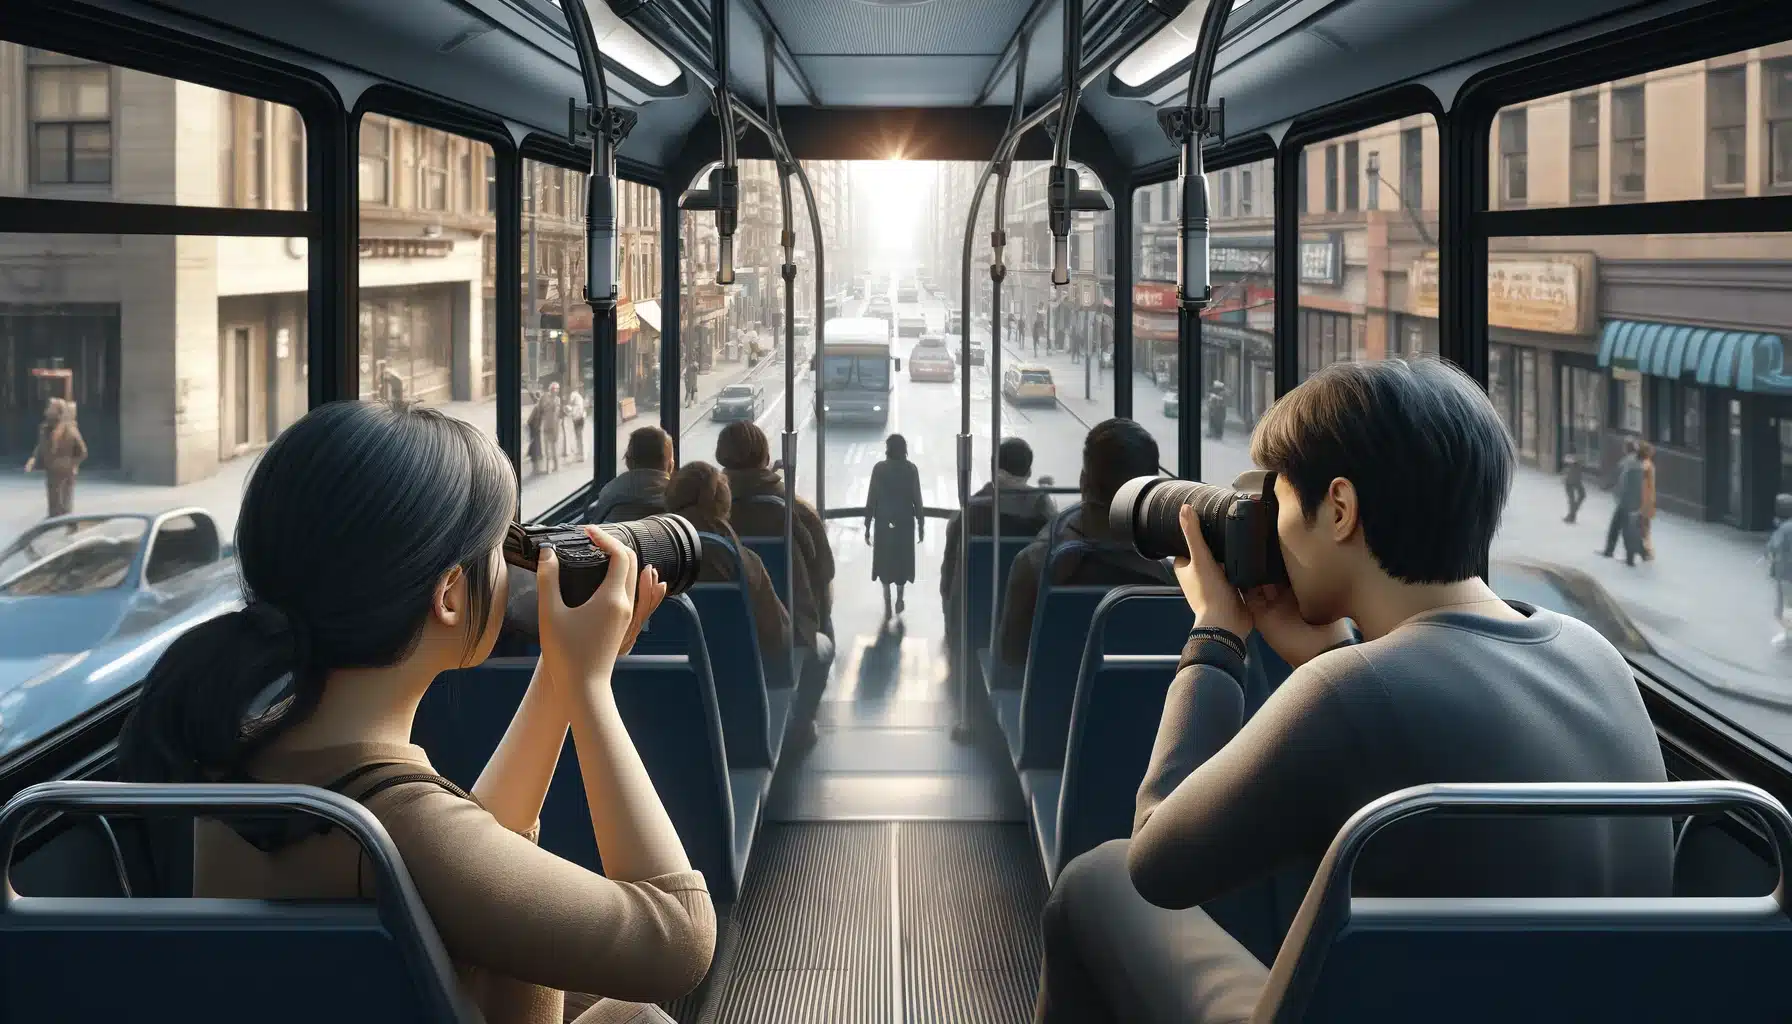 Two photographers inside a bus, one capturing city architecture with a mirrorless camera and the other photographing street life with a DSLR, illustrating the use of cameras in travel photography.